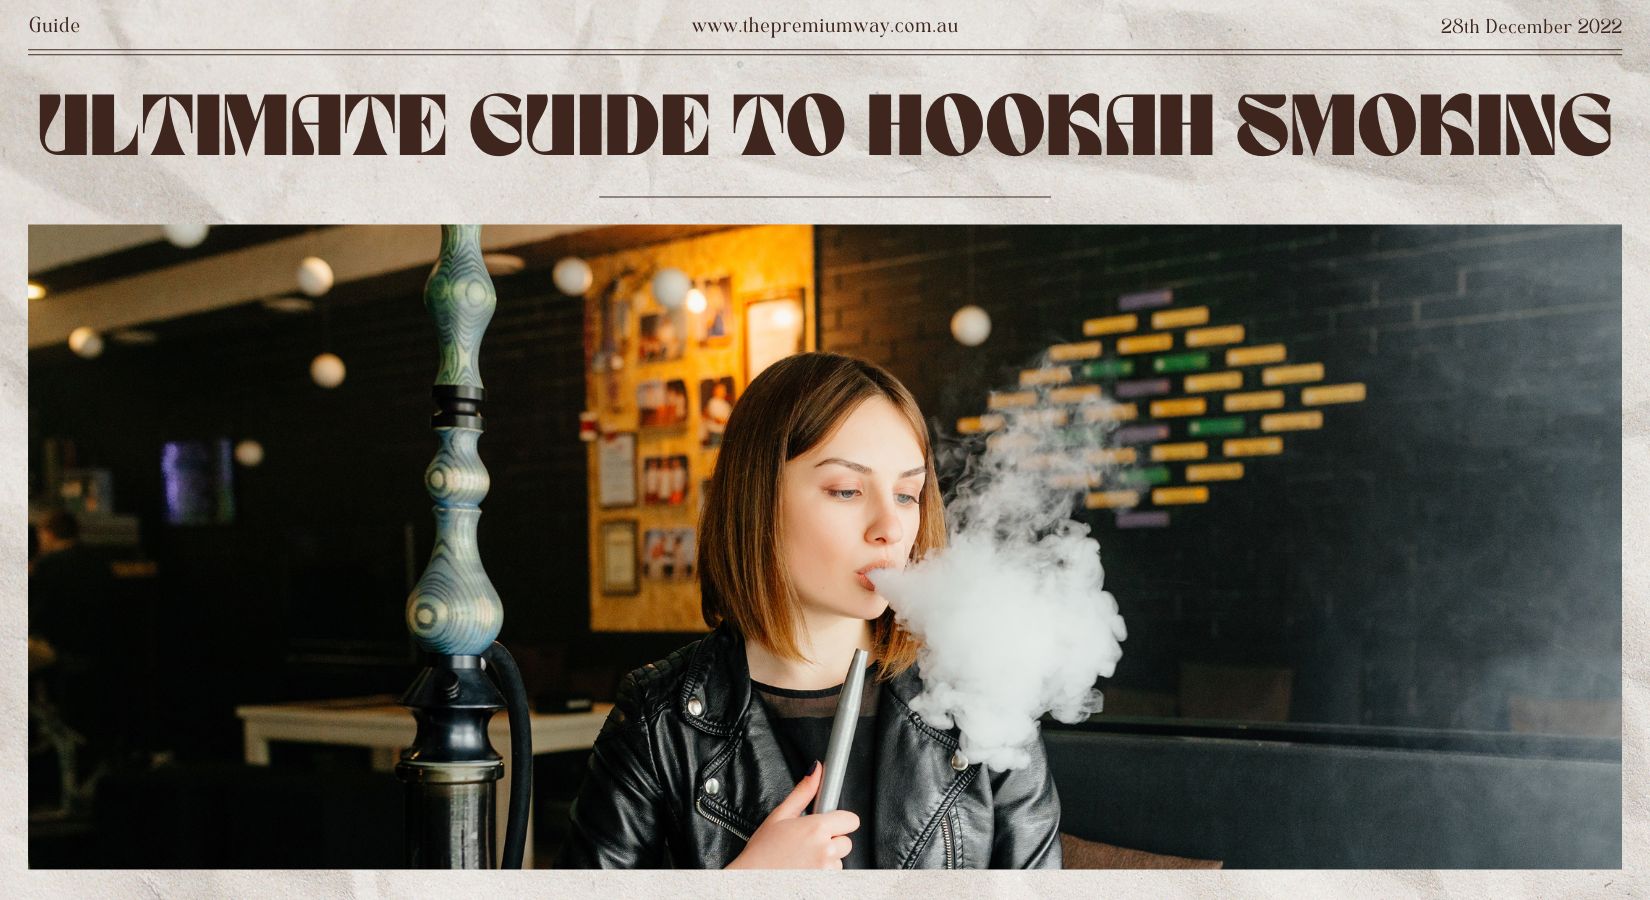 The Ultimate Guide to Hookah Smoking: Must-Haves and Add-Ons - The Premium Way